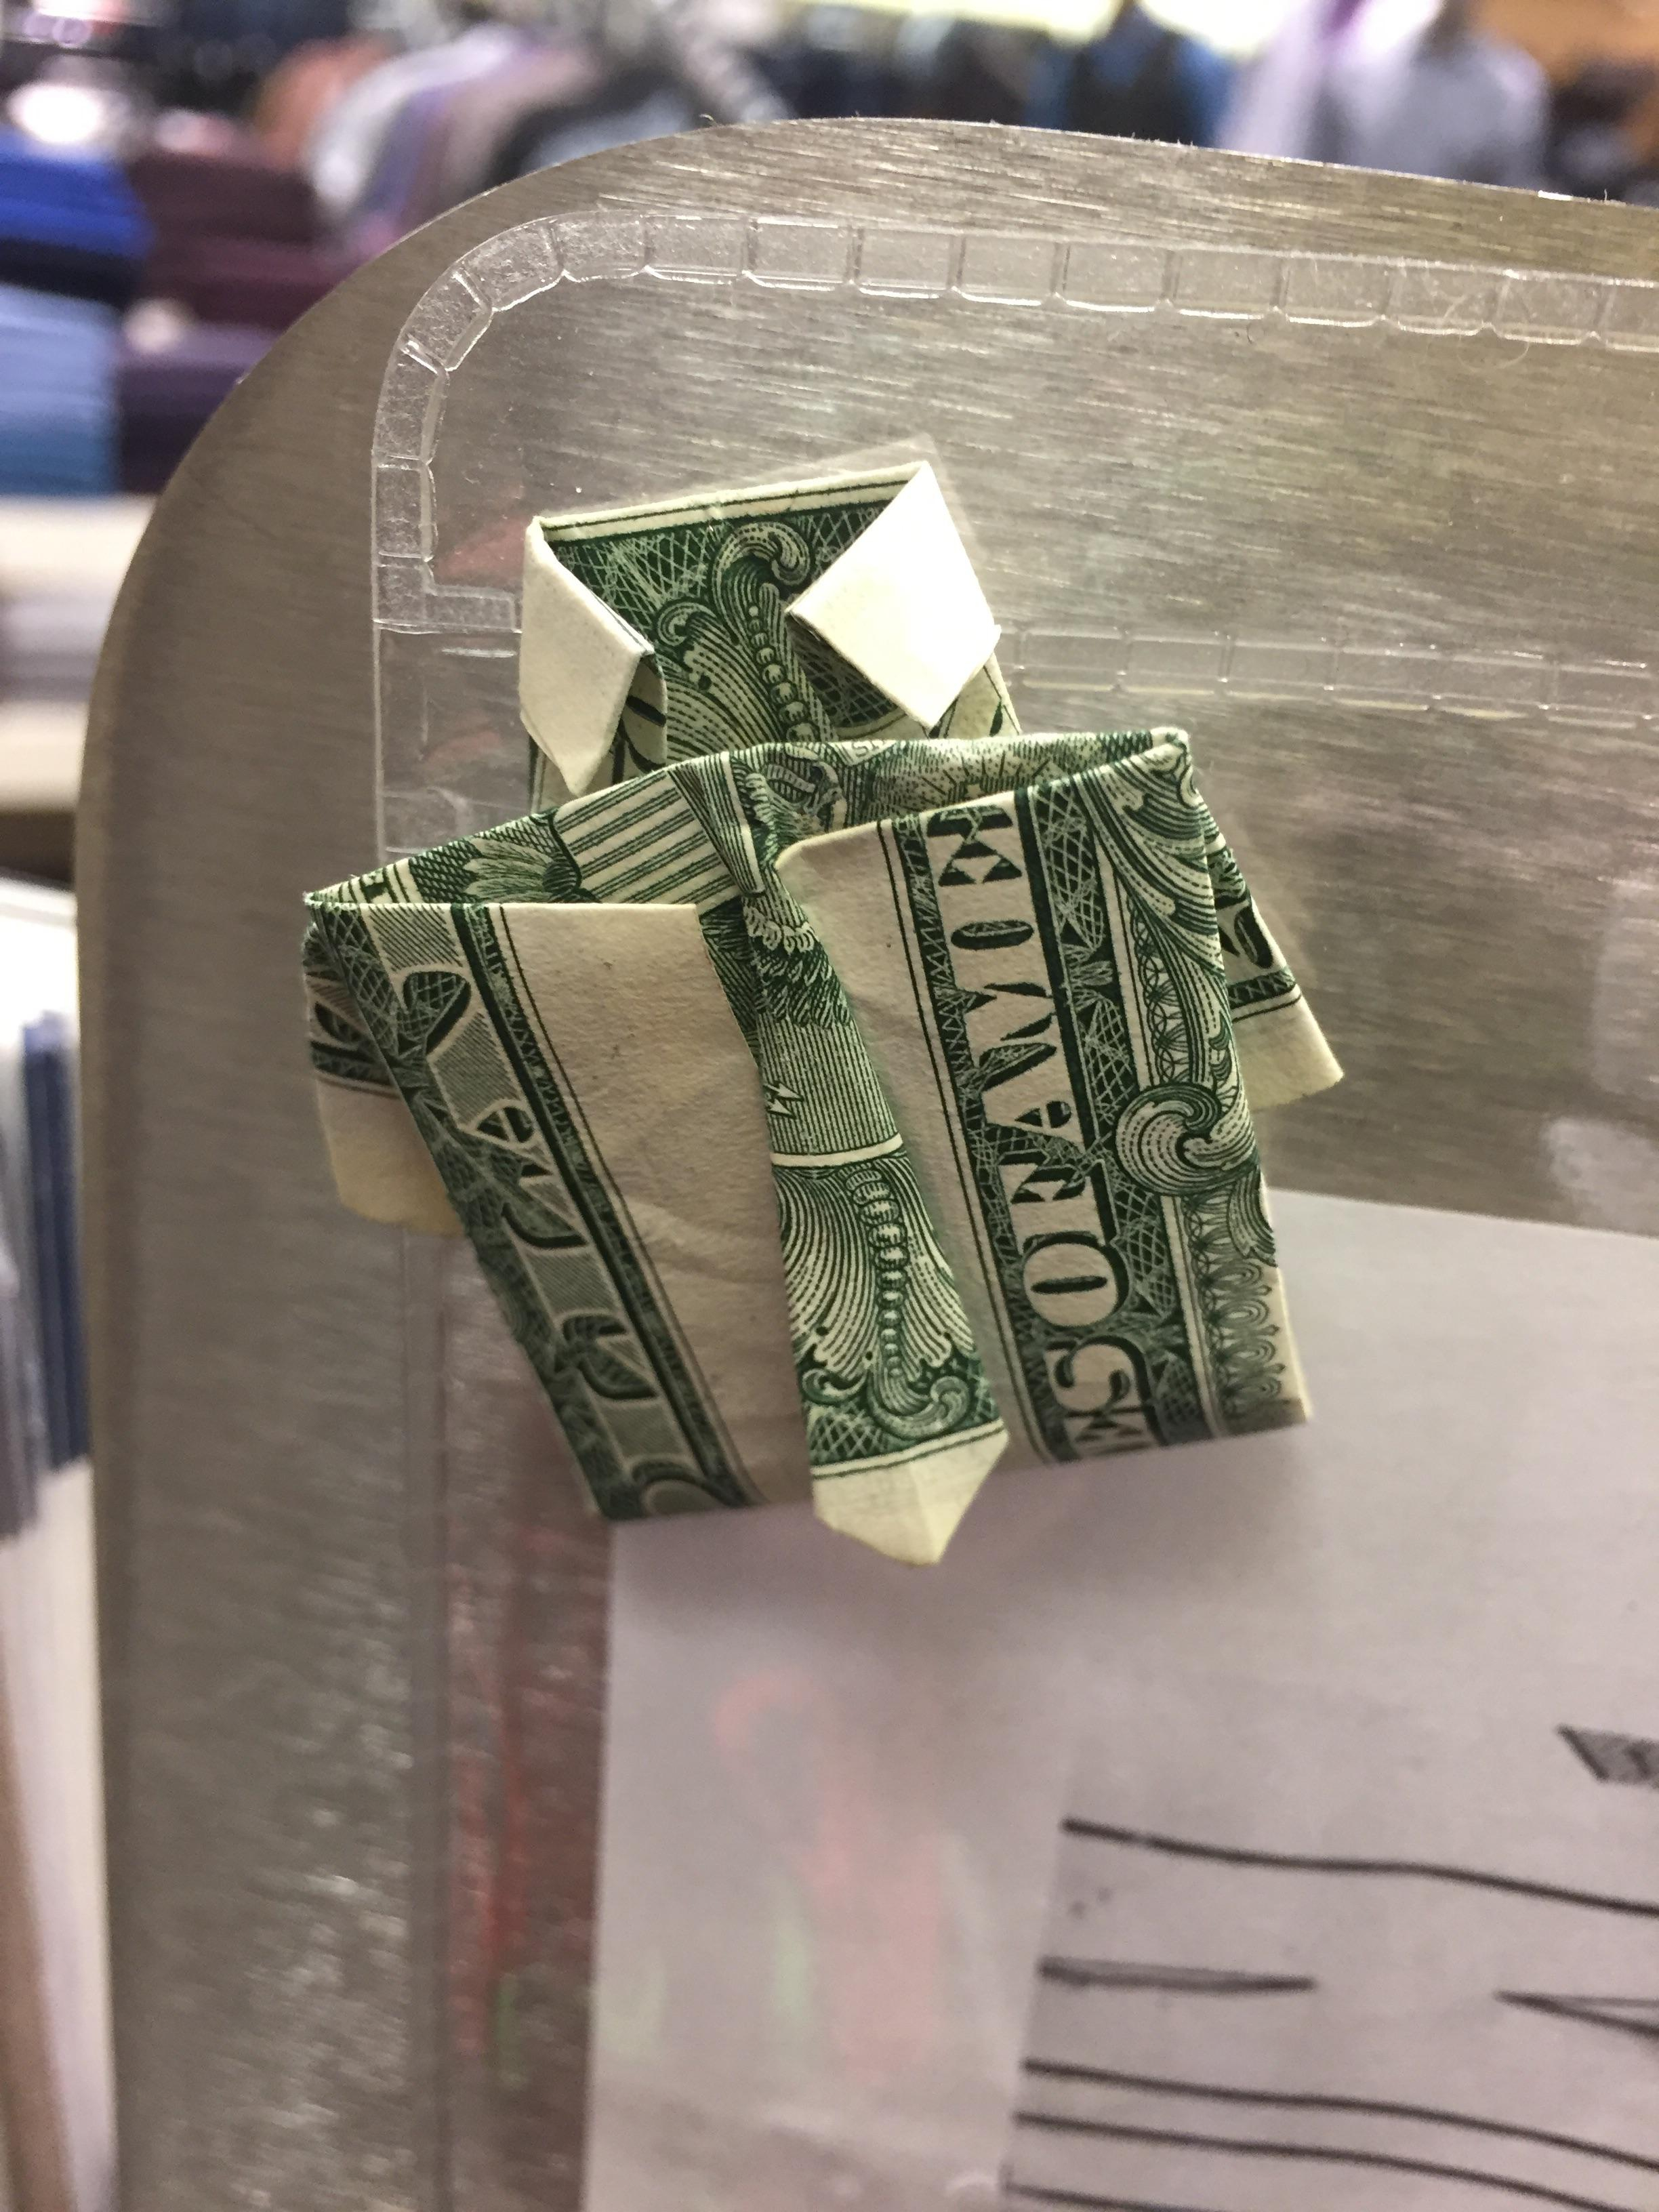 Dollar Bill Origami Shirt With Tie I Work At A Mens Store And Someone Was Able To Fold This Dollar